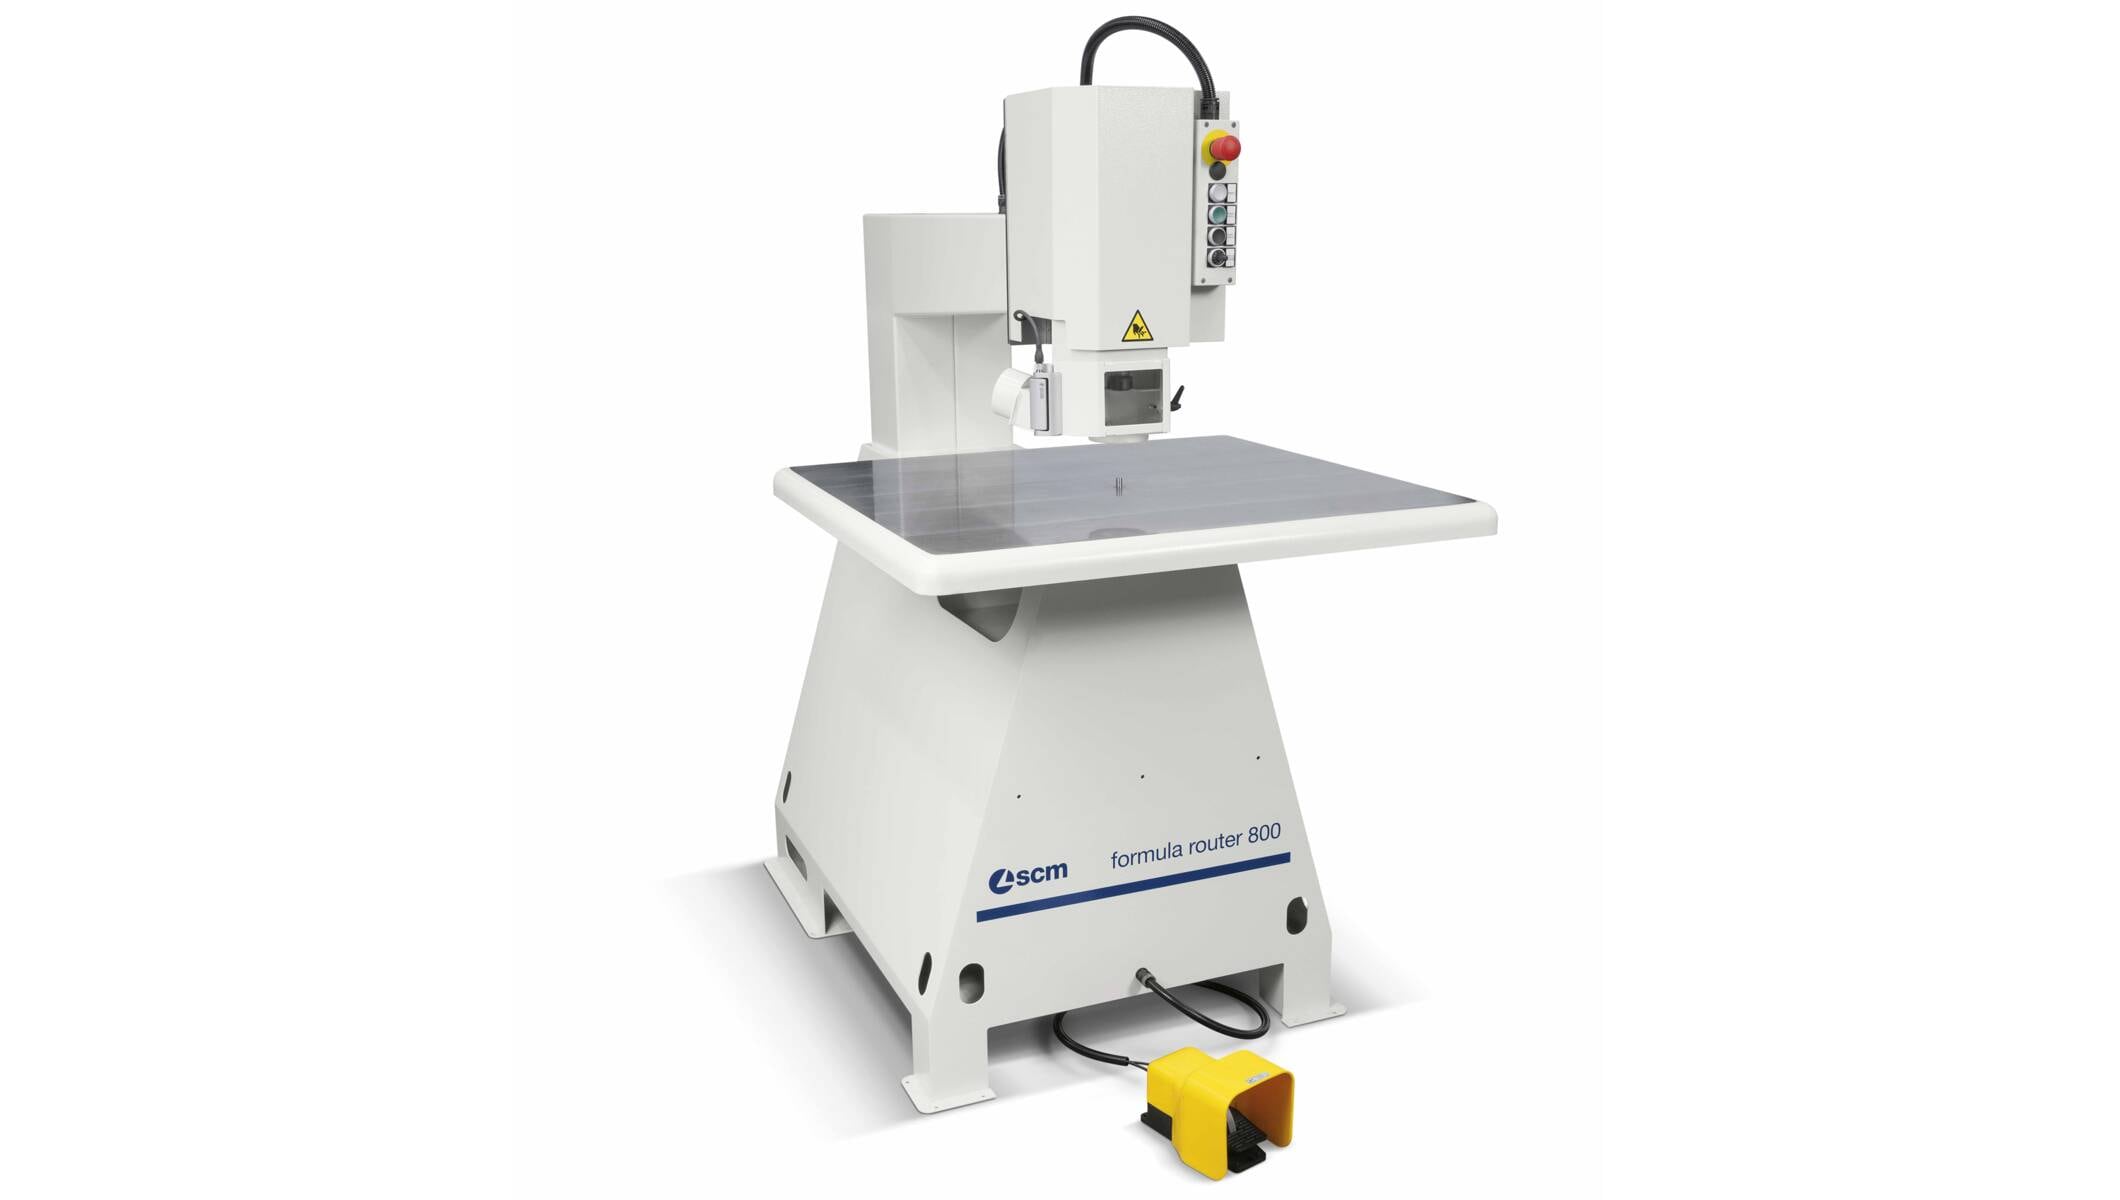 Joinery machines - Vertical router - formula router 800